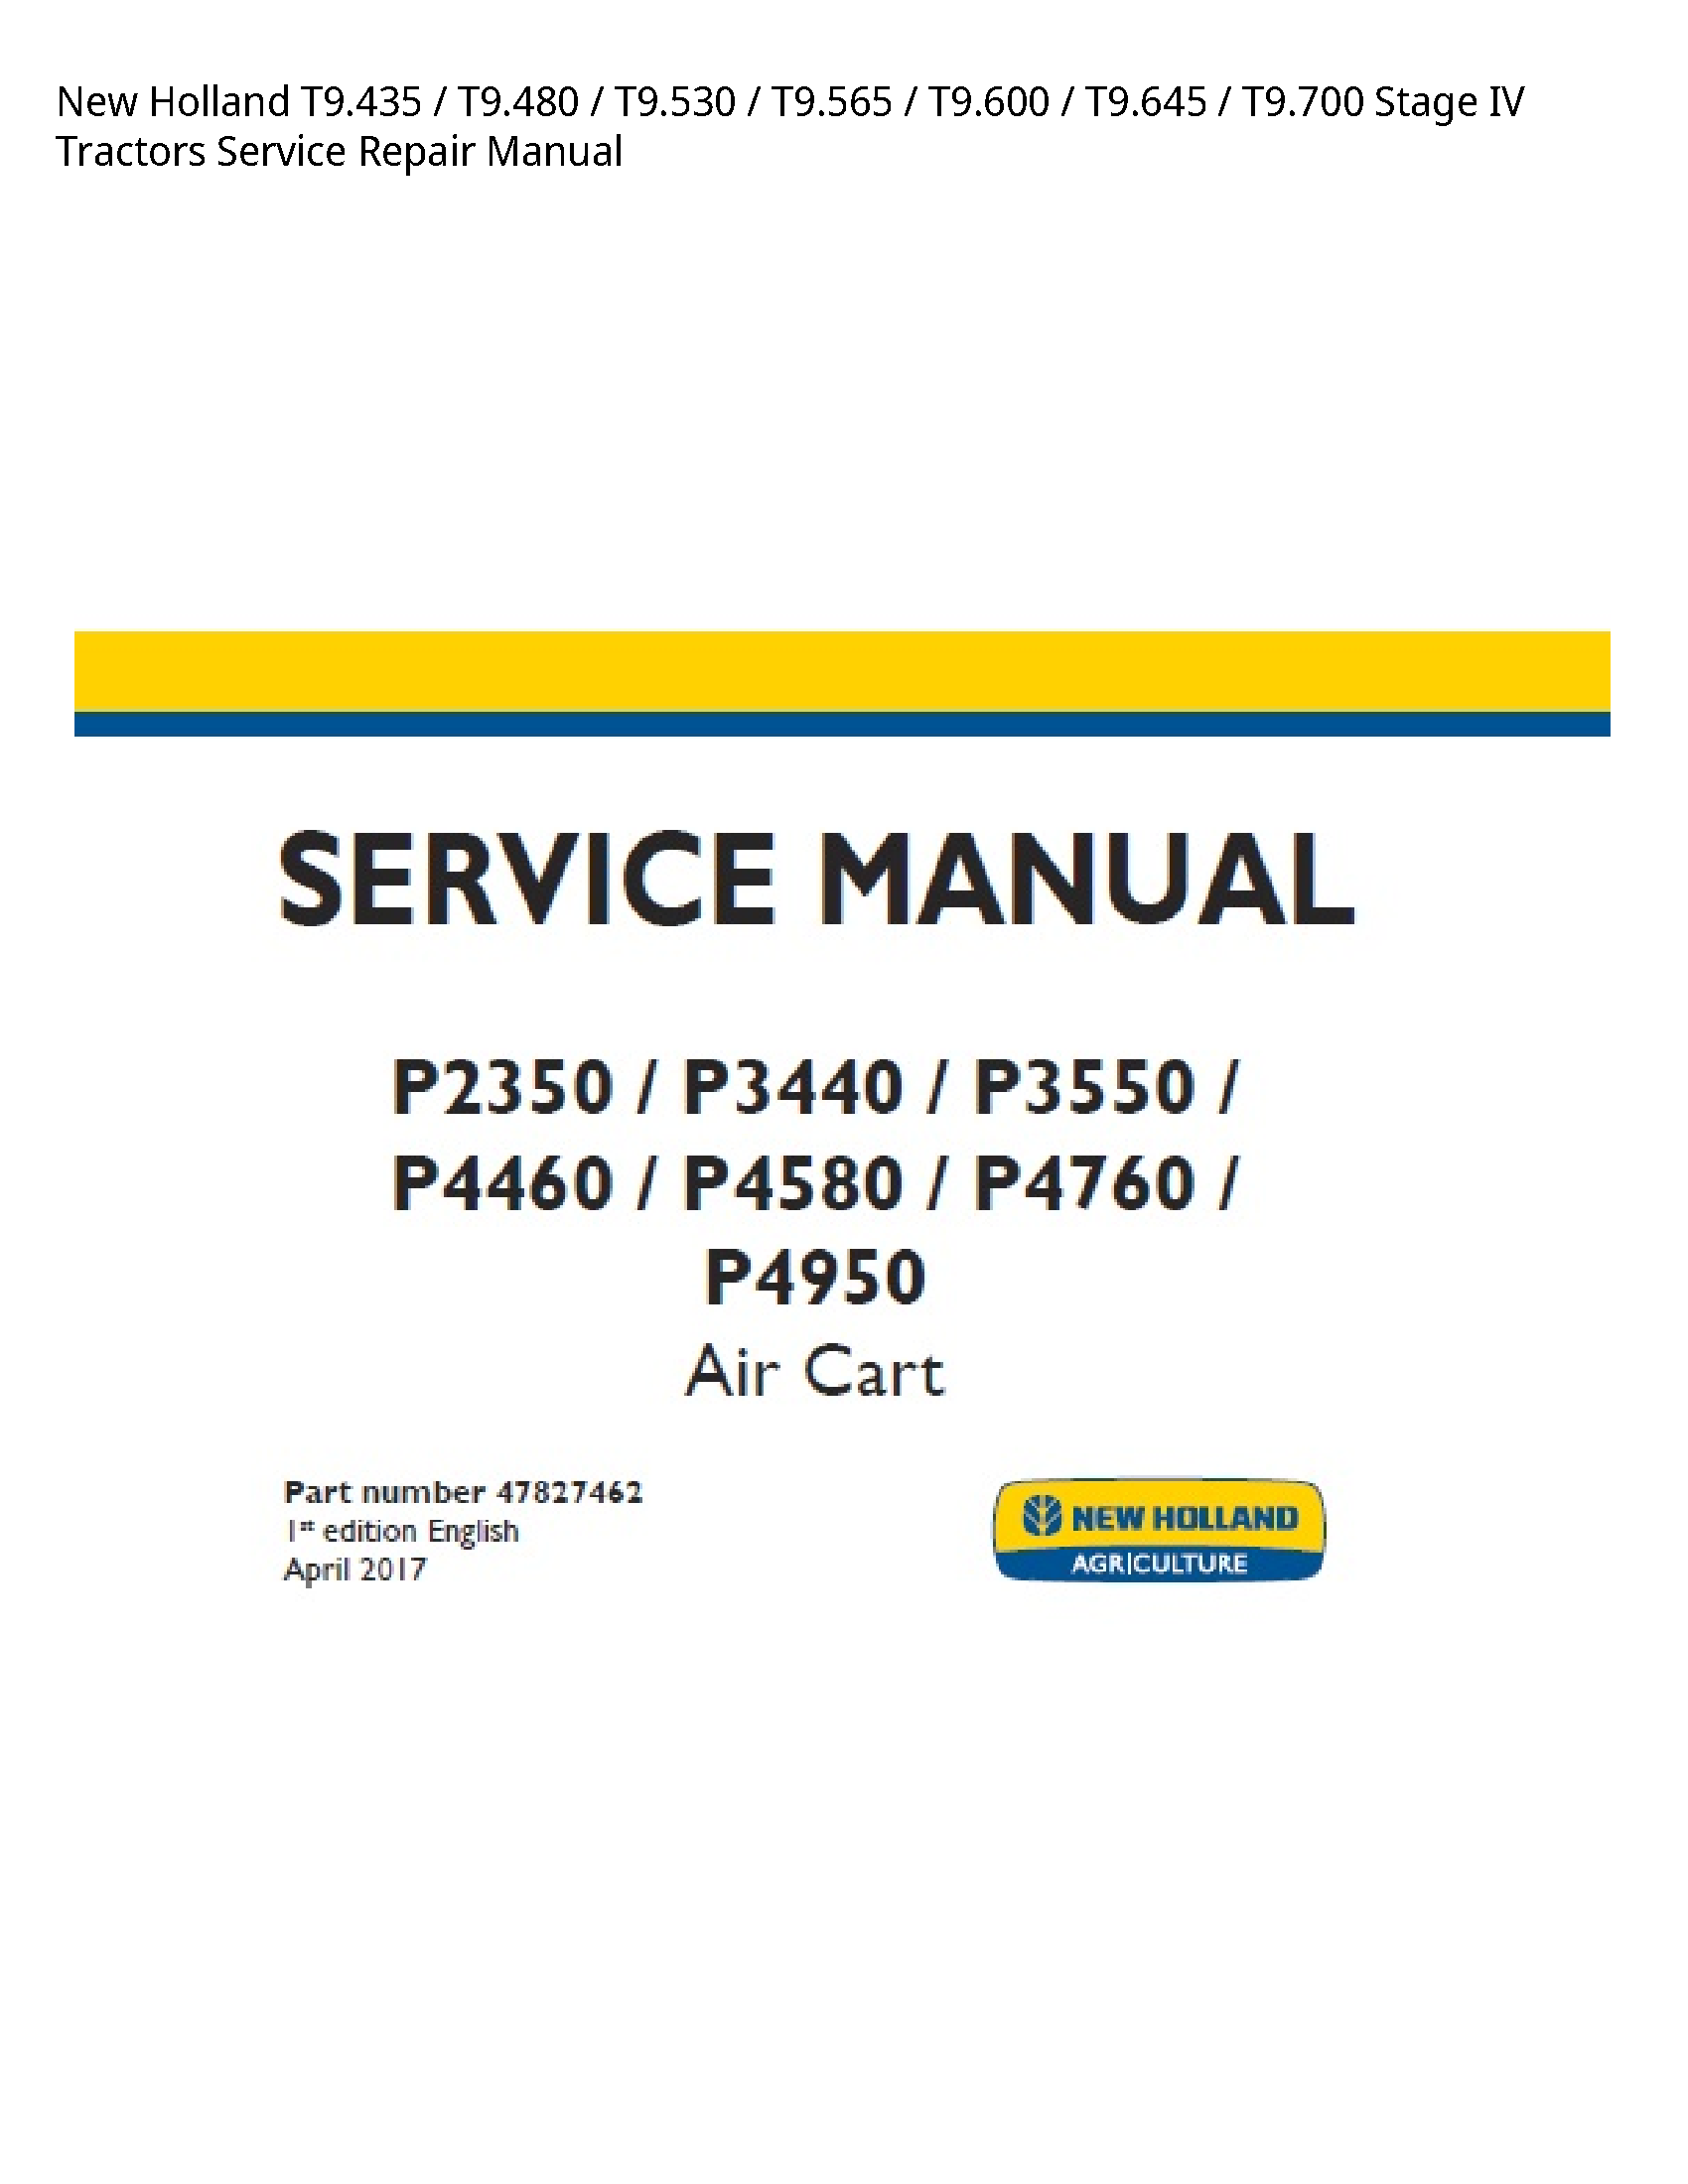 New Holland T9.435 Stage IV Tractors manual